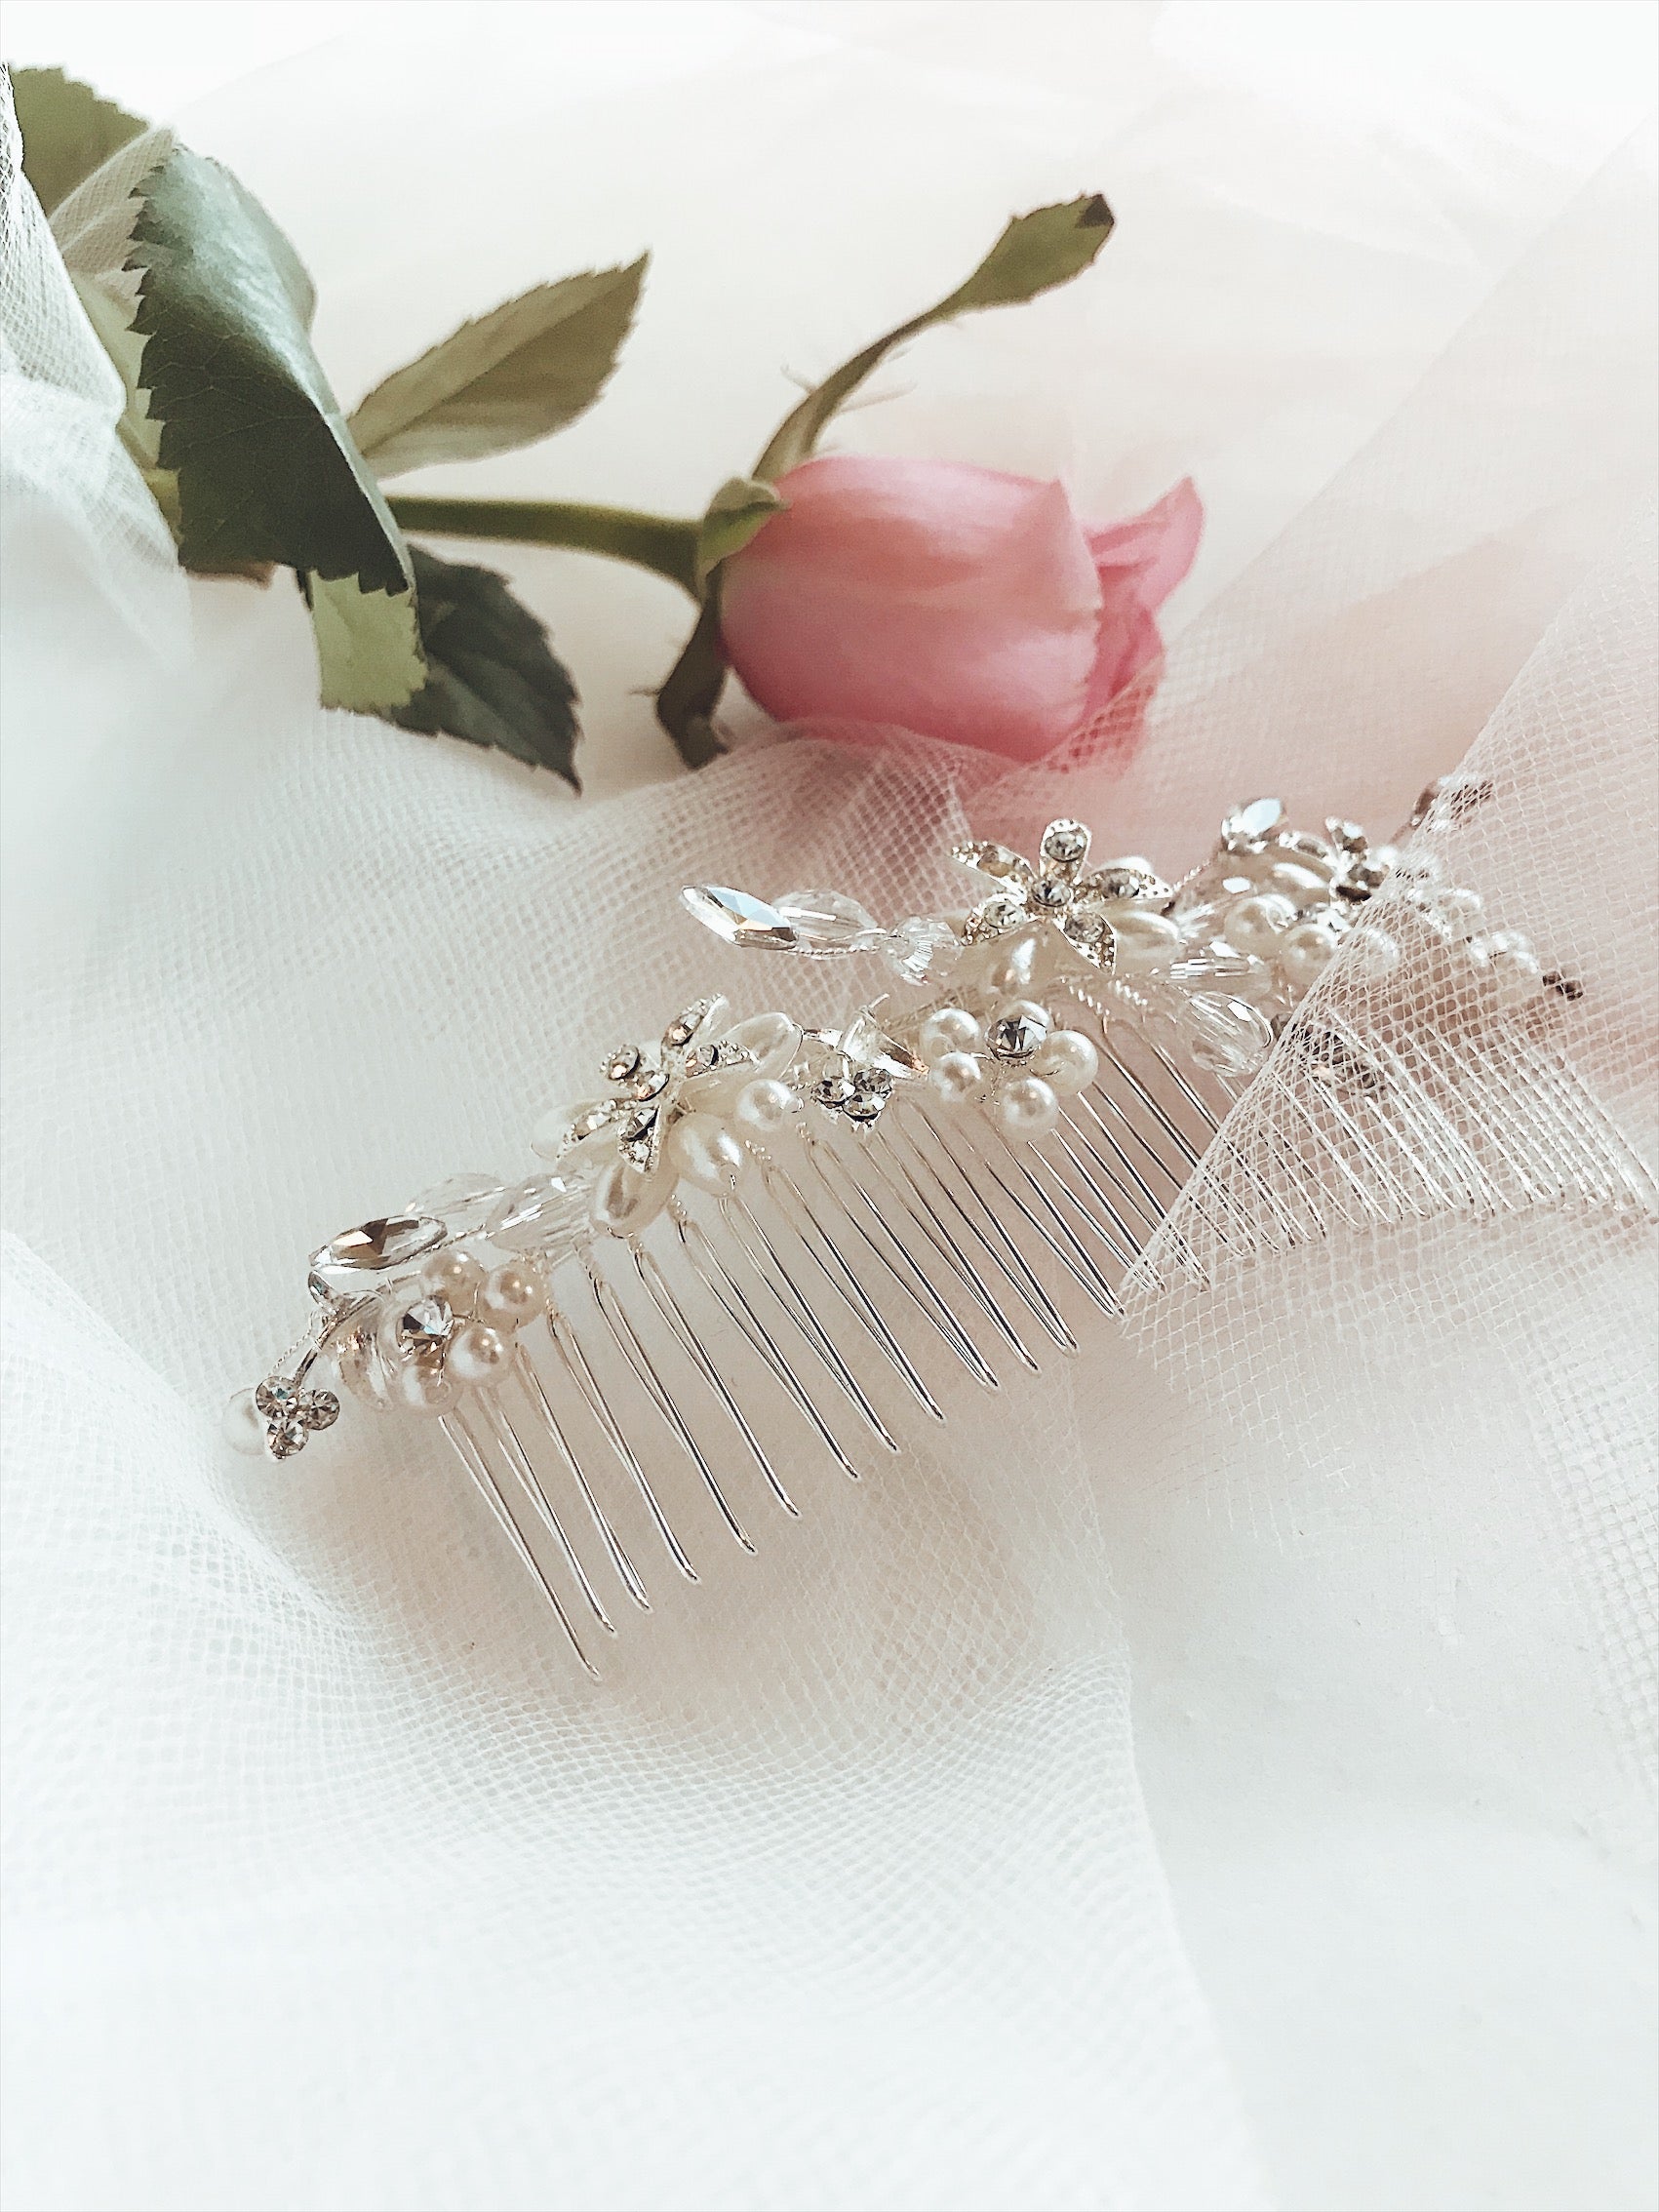 Closeup detailing of the Lauren Elaine Bridal "Honeysuckle" wedding hair comb with crystal and pearl detailing